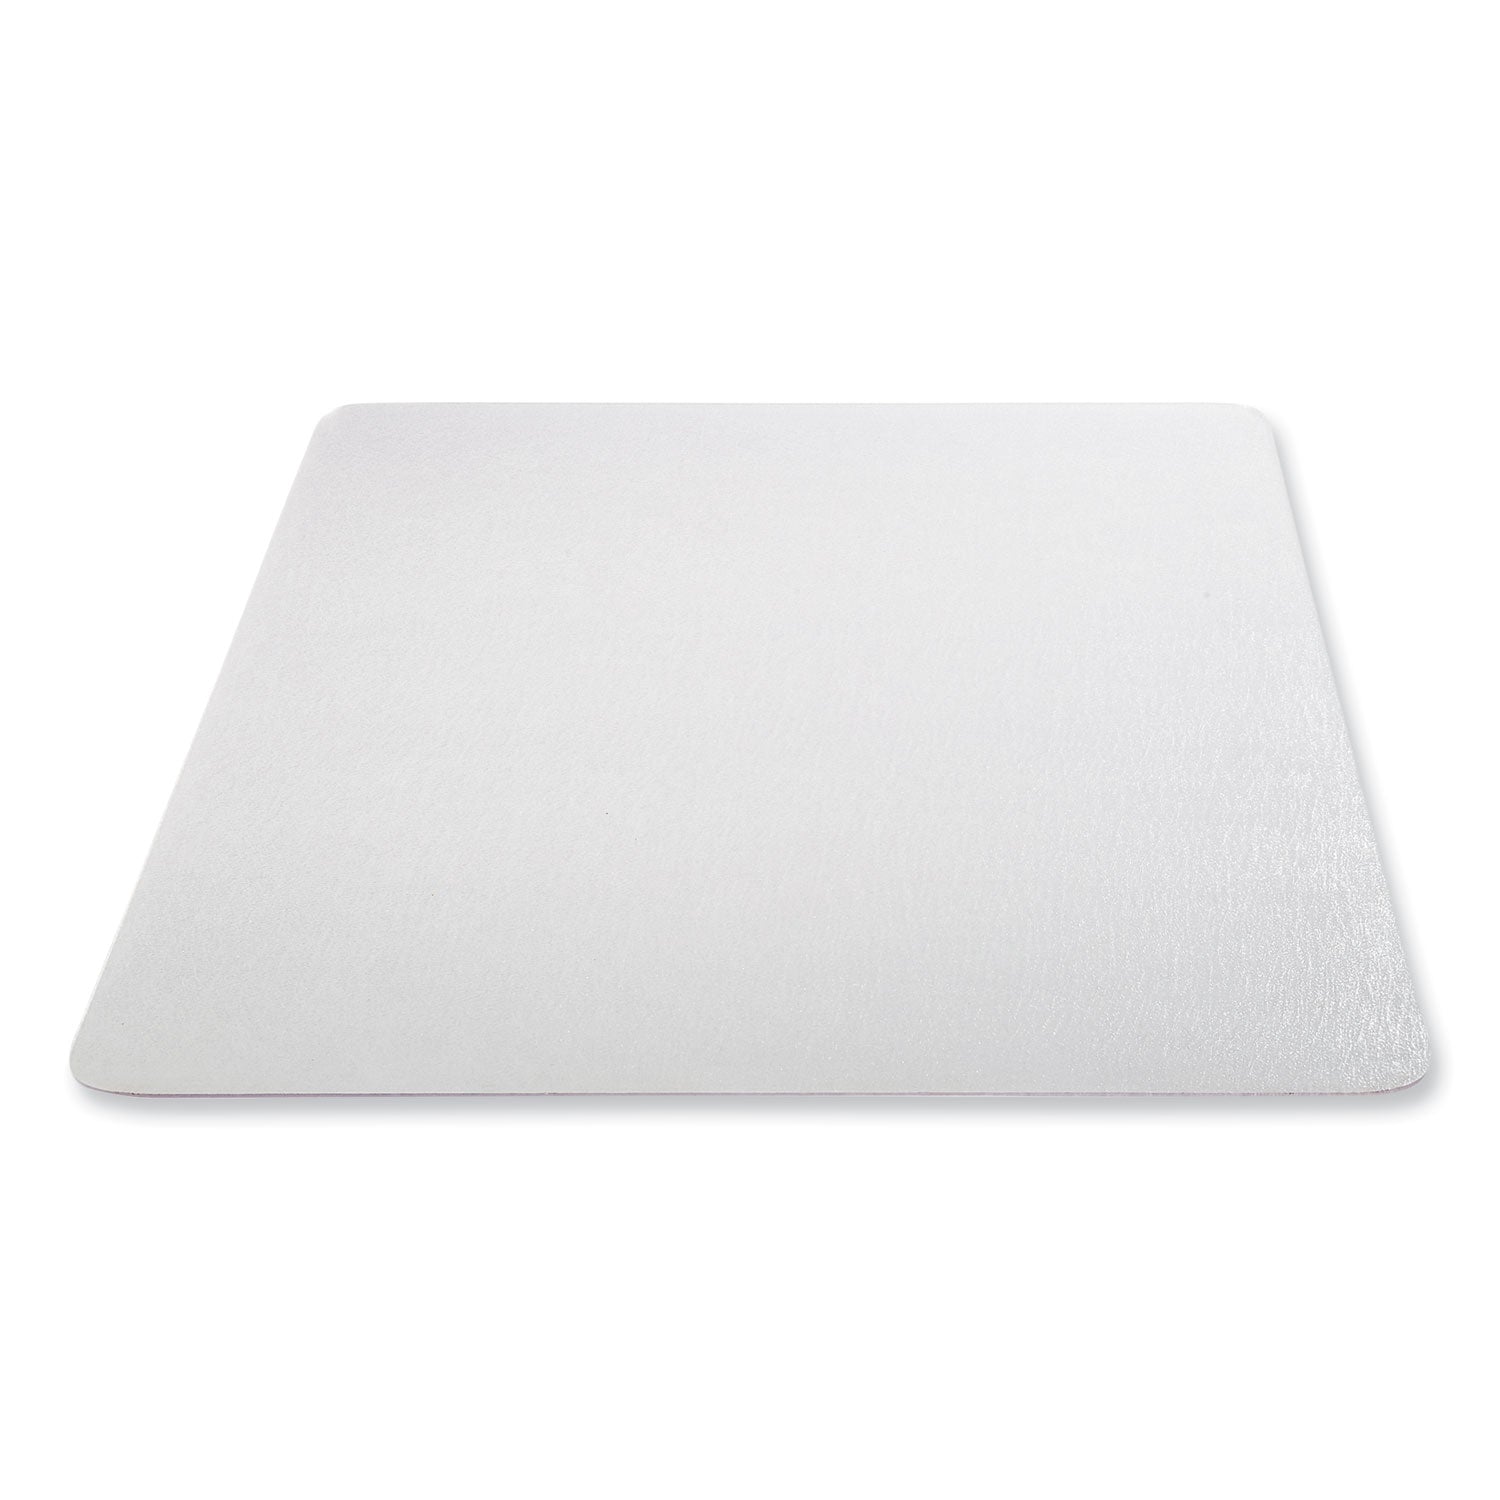 economat-all-day-use-chair-mat-for-hard-floors-flat-packed-45-x-53-clear_defcm2e242 - 7